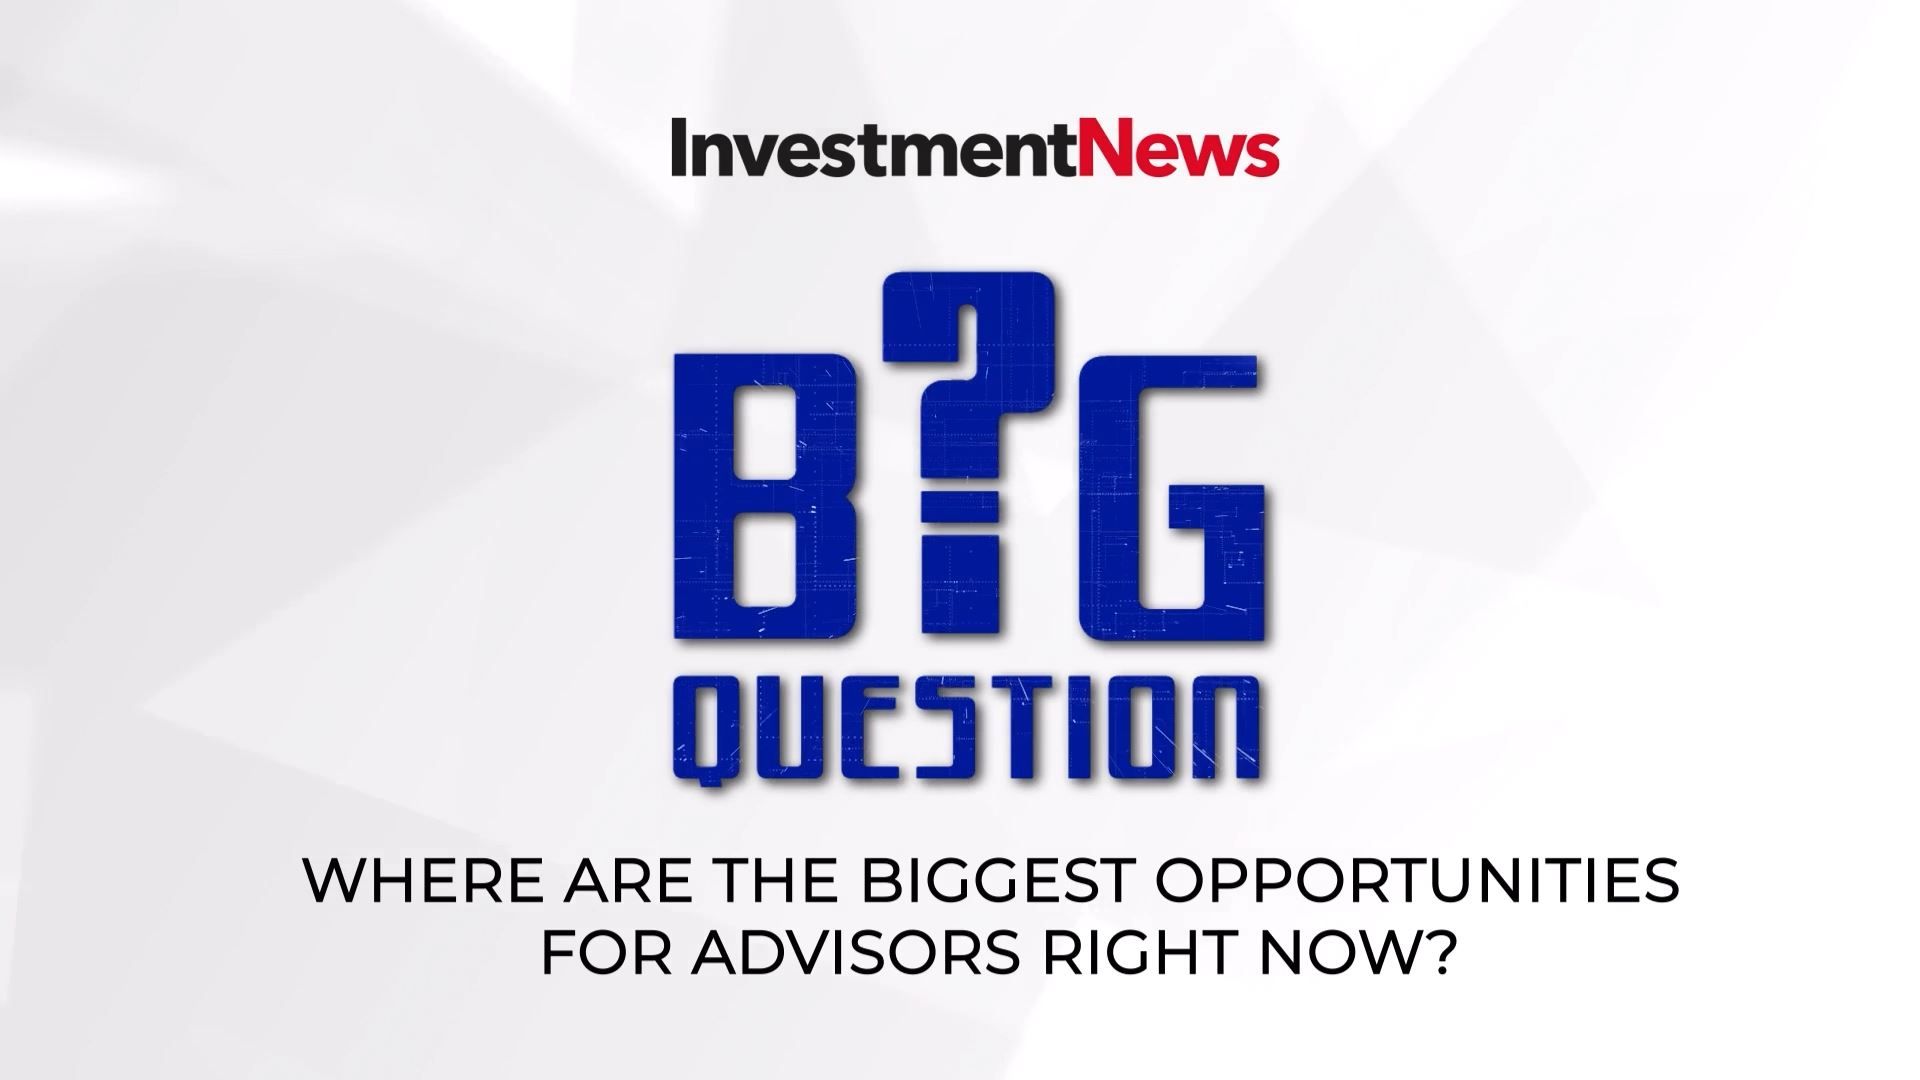 Where are the biggest opportunities for advisors right now?